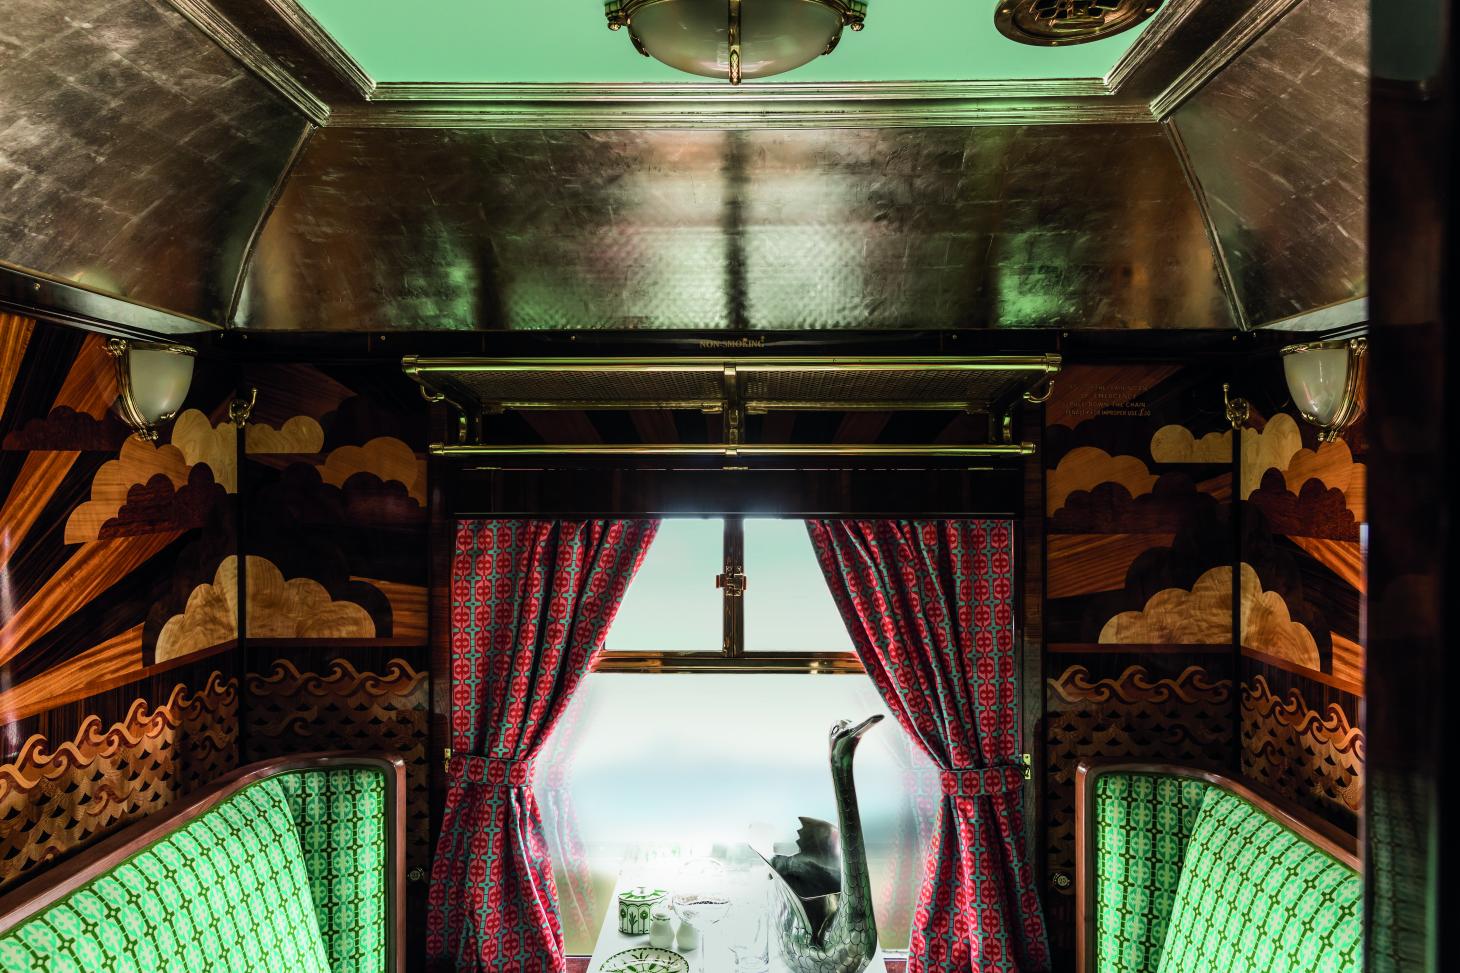 Wes Anderson designed a train interior this time